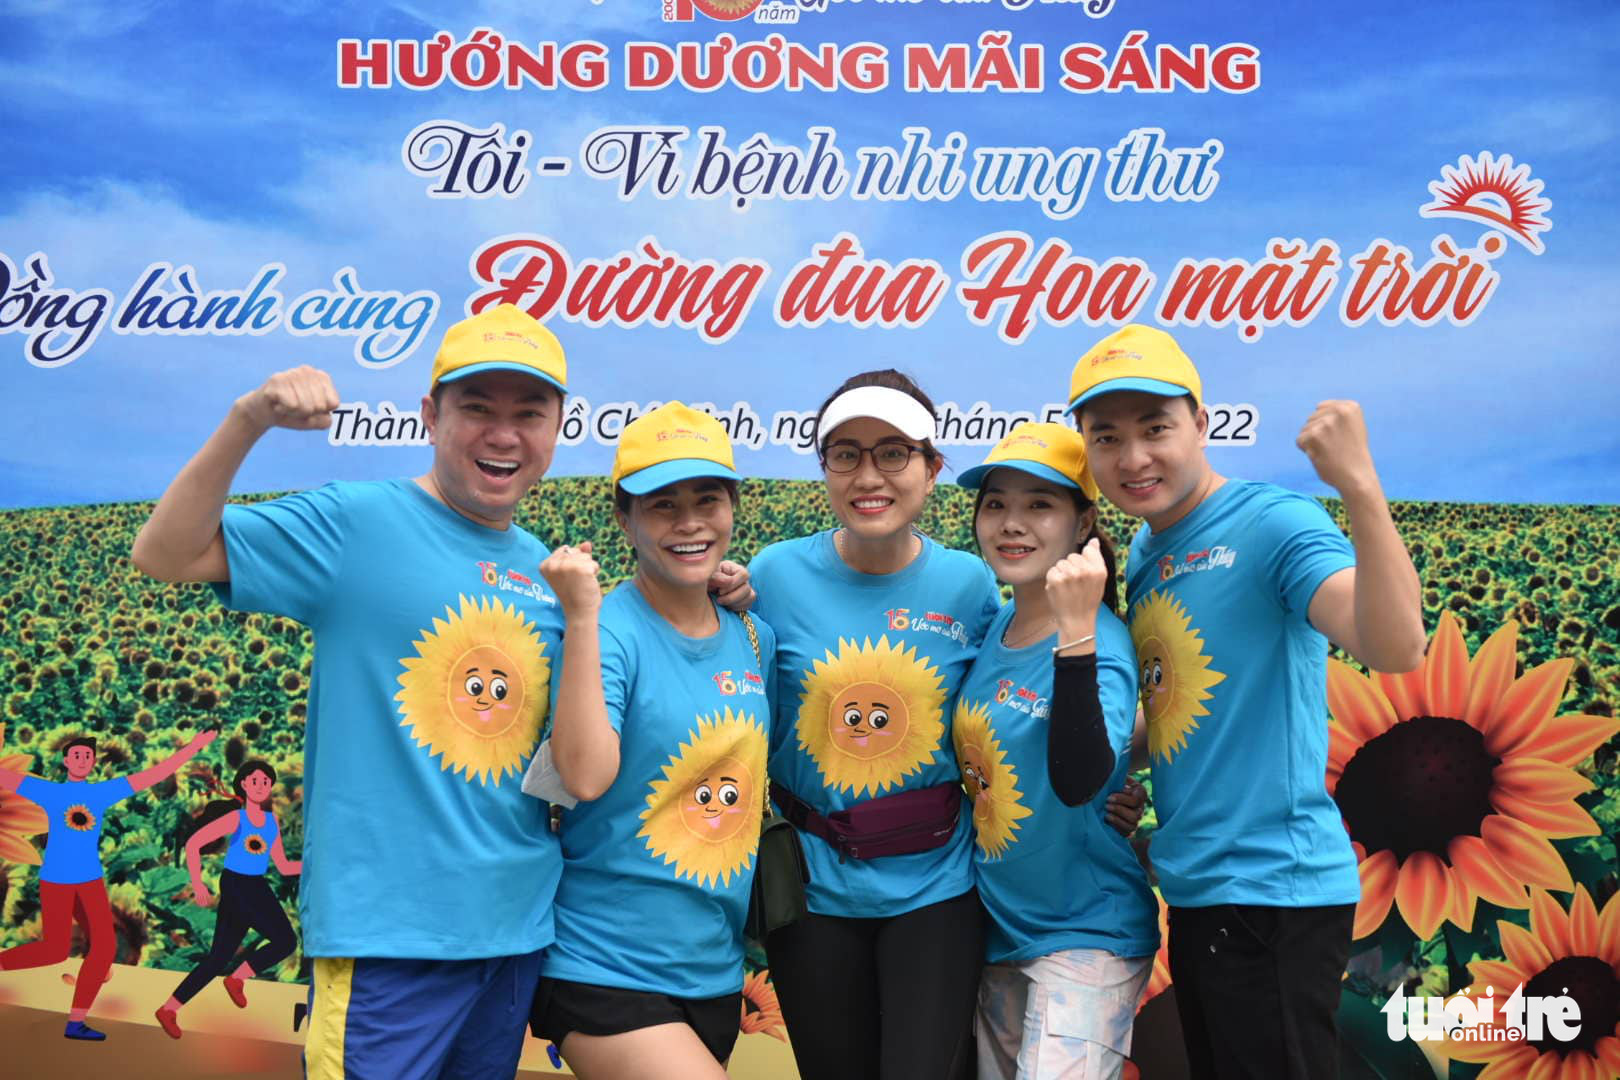 Vietnamese artists pose for a photo at the Sunflower Marathon in Binh Thanh District, Ho Chi Minh City, May 22, 2022. Photo: Ngoc Phuong / Tuoi Tre